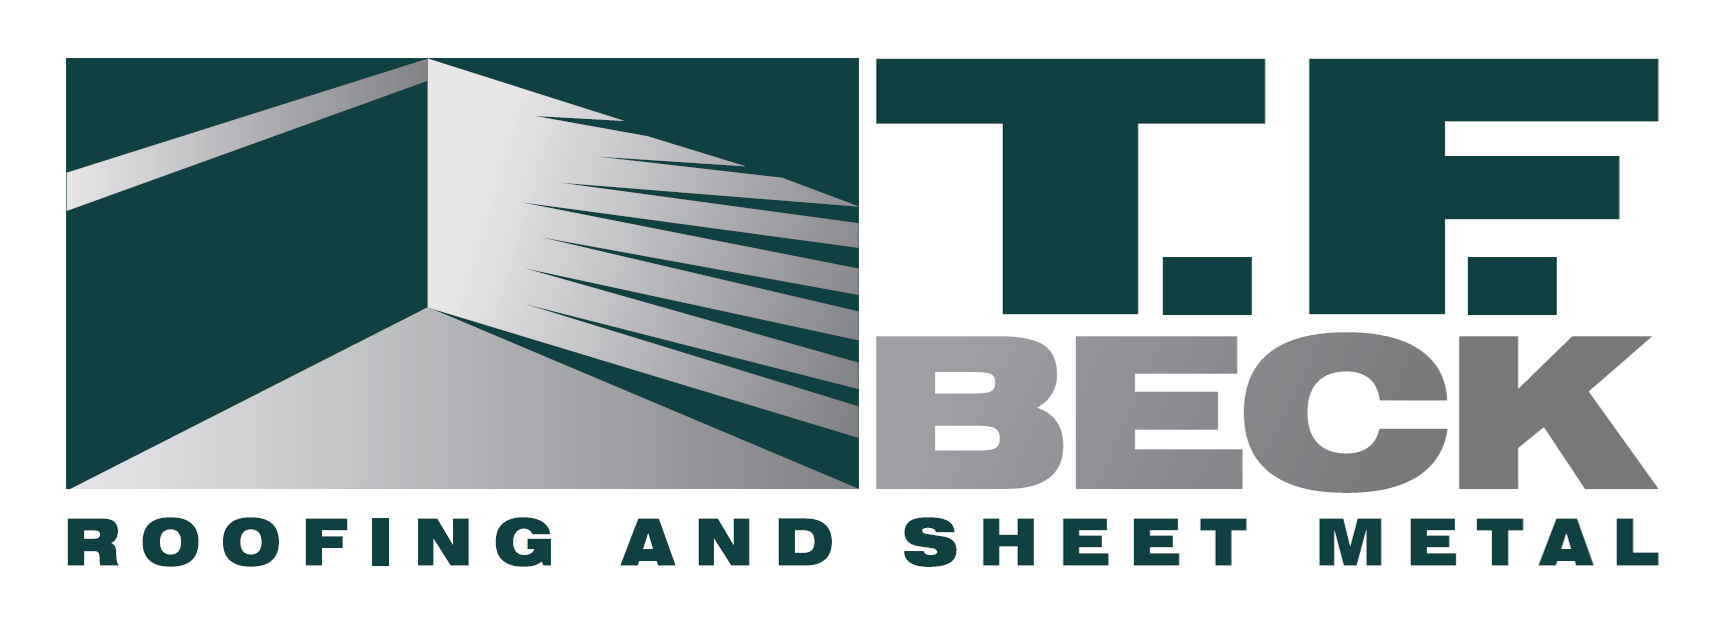 TF Beck Roofing and Sheet Metal Logo